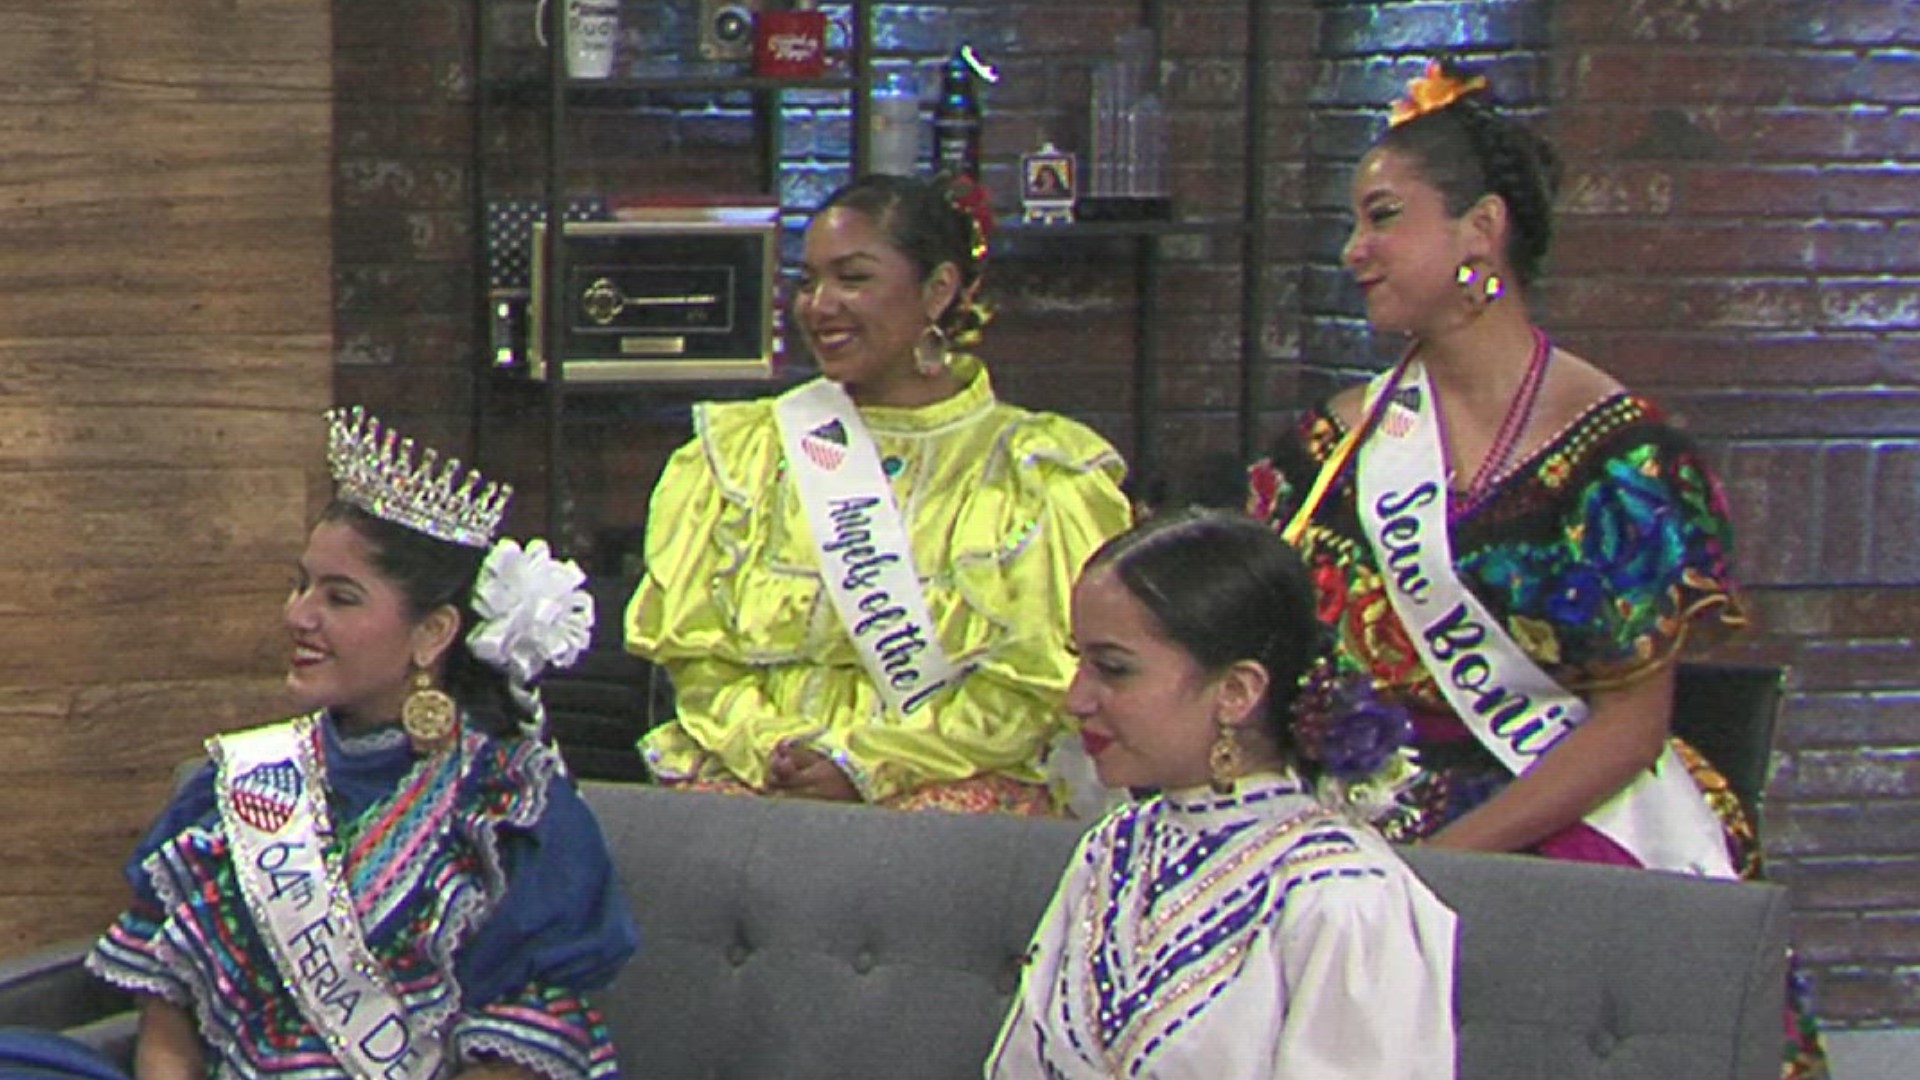 The 64th Annual Feria de las Flores Royal Court joined us on Domingo Live to introduce themselves and share their experiences of the program and competition.